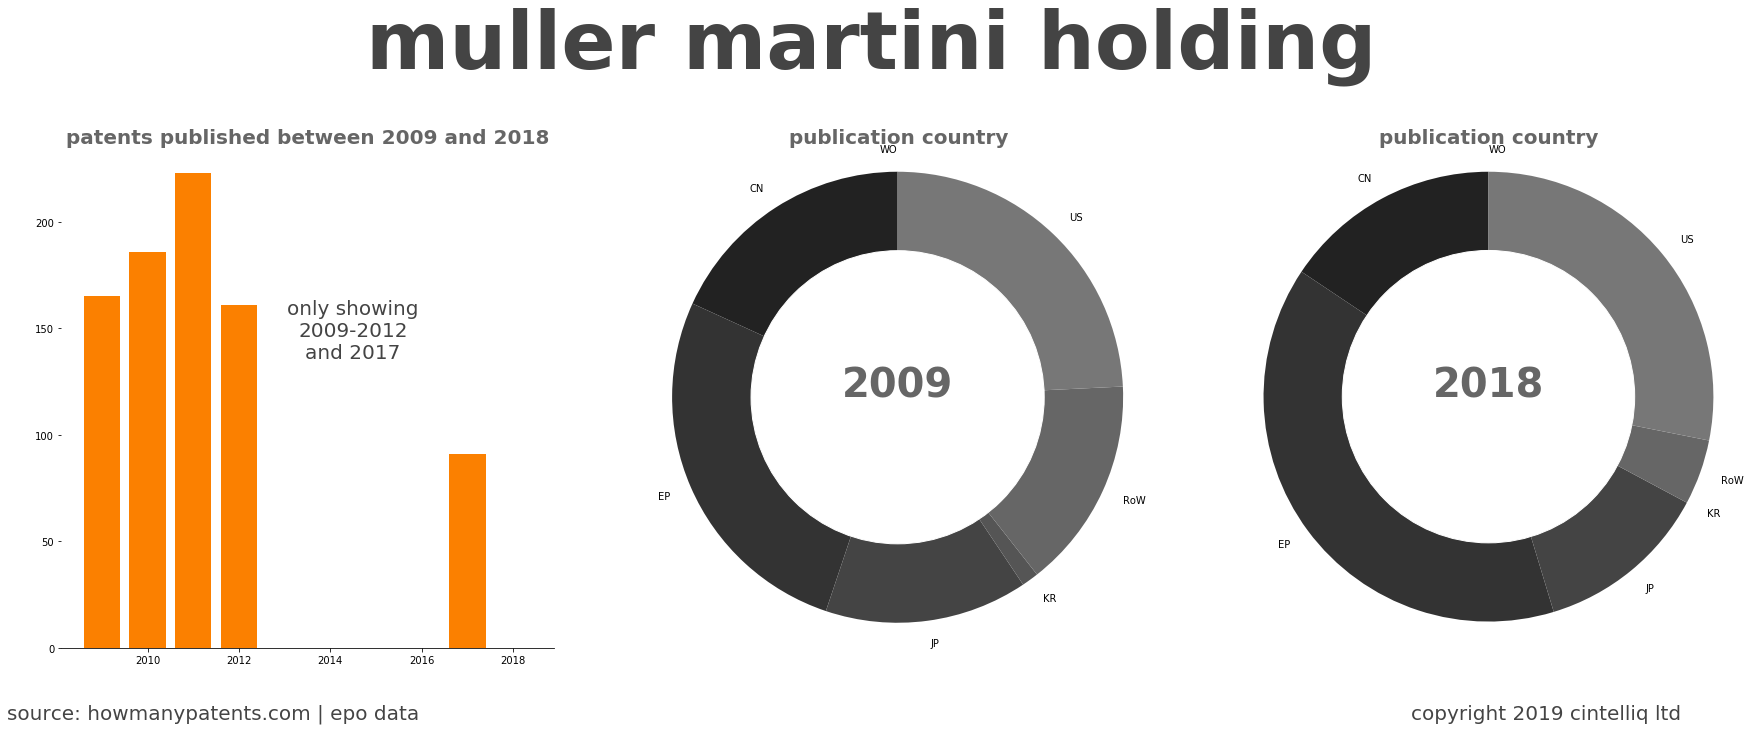 summary of patents for Muller Martini Holding